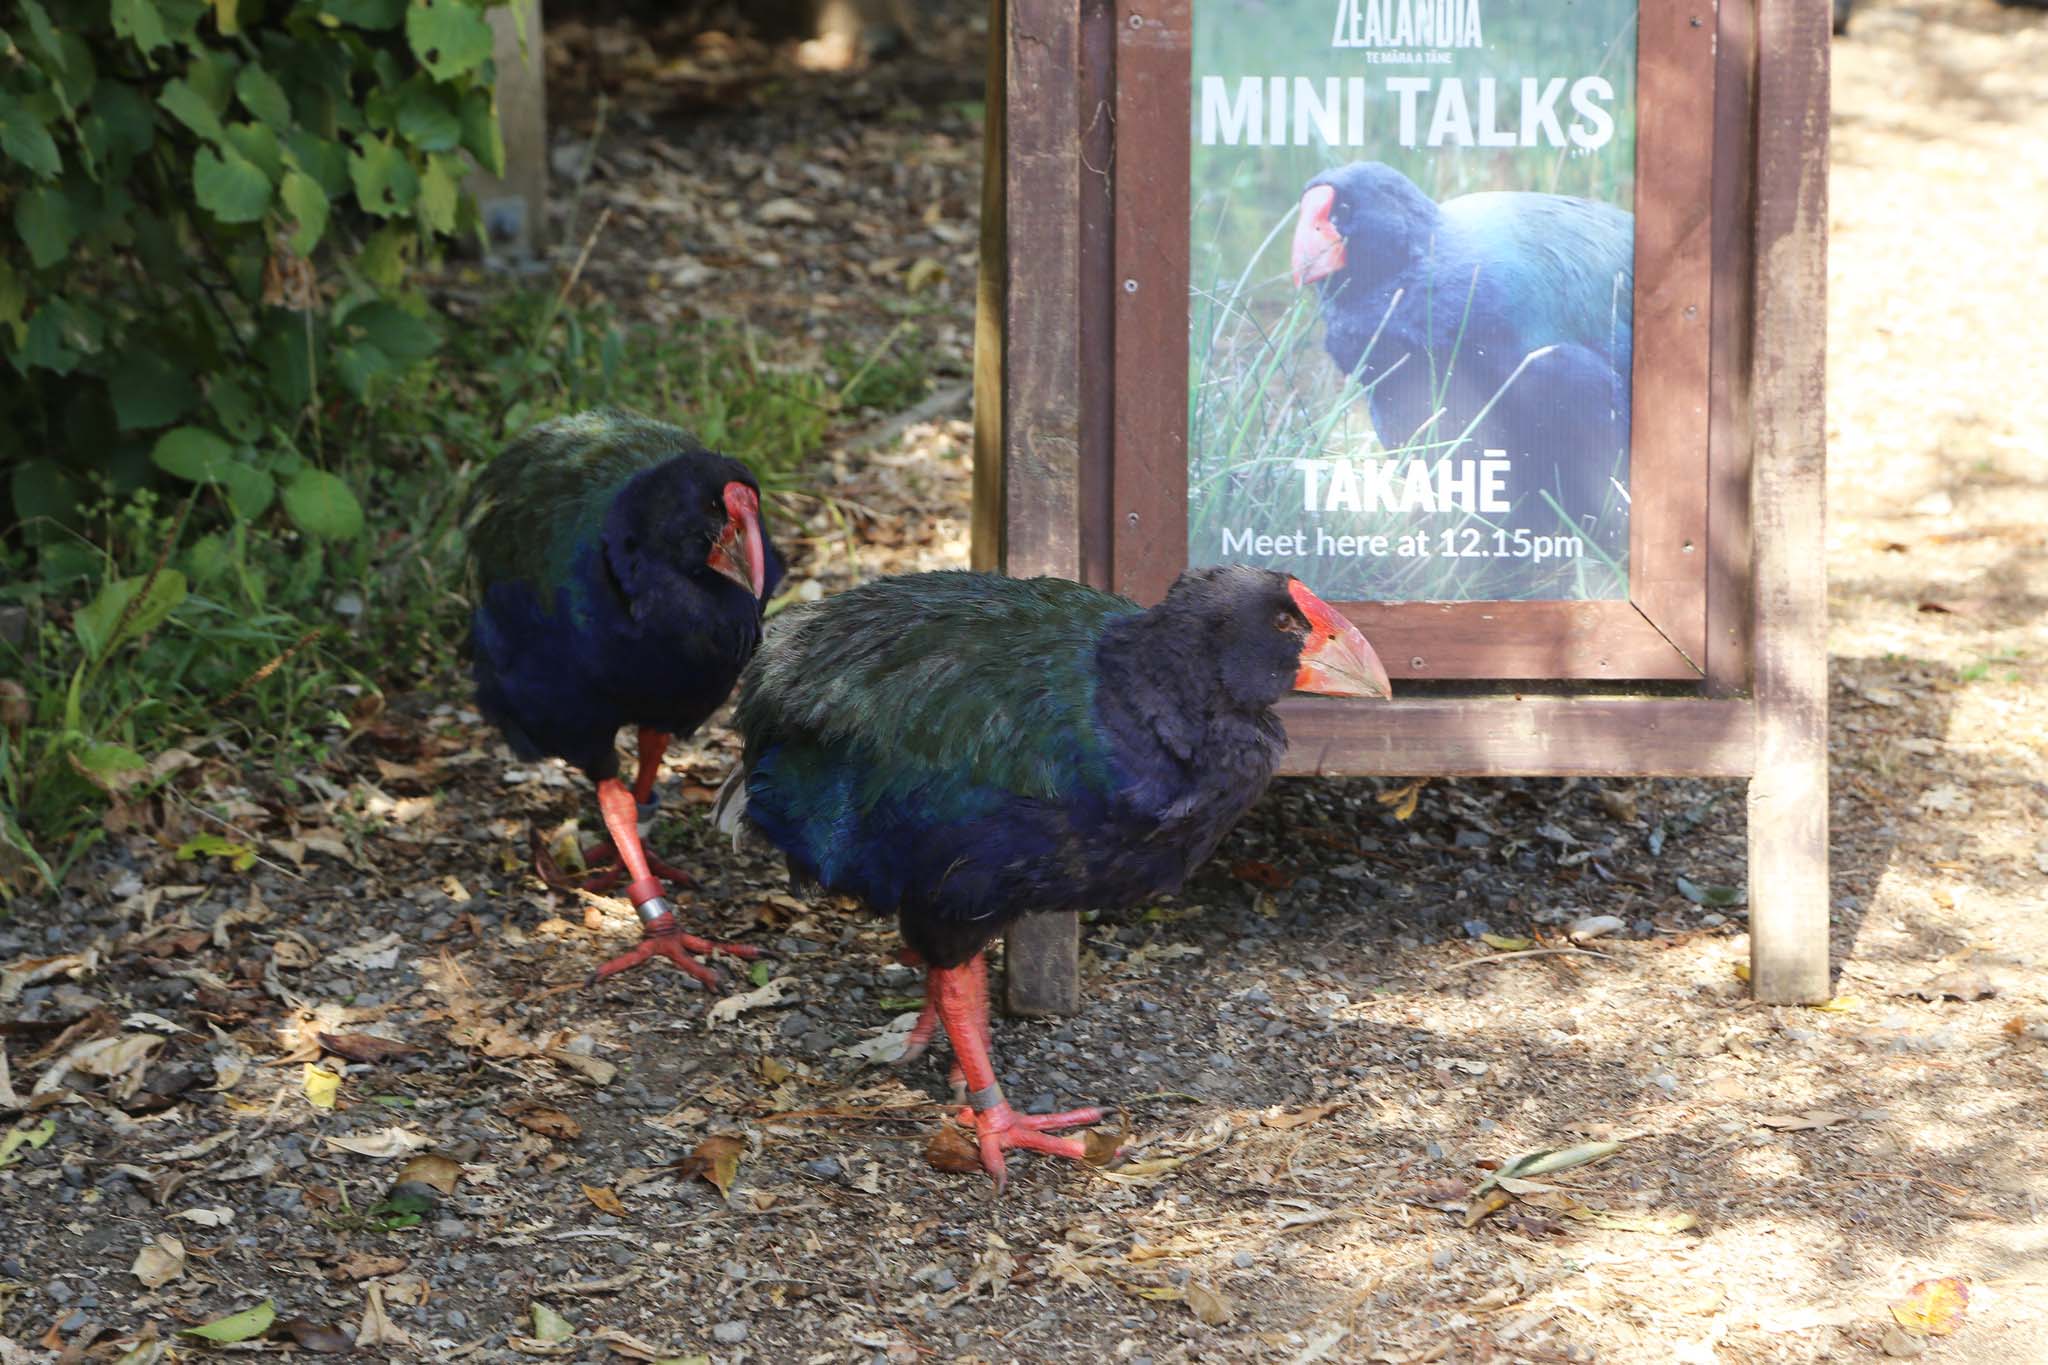 Two takahe walking next to a sign promoting a talk about takahe